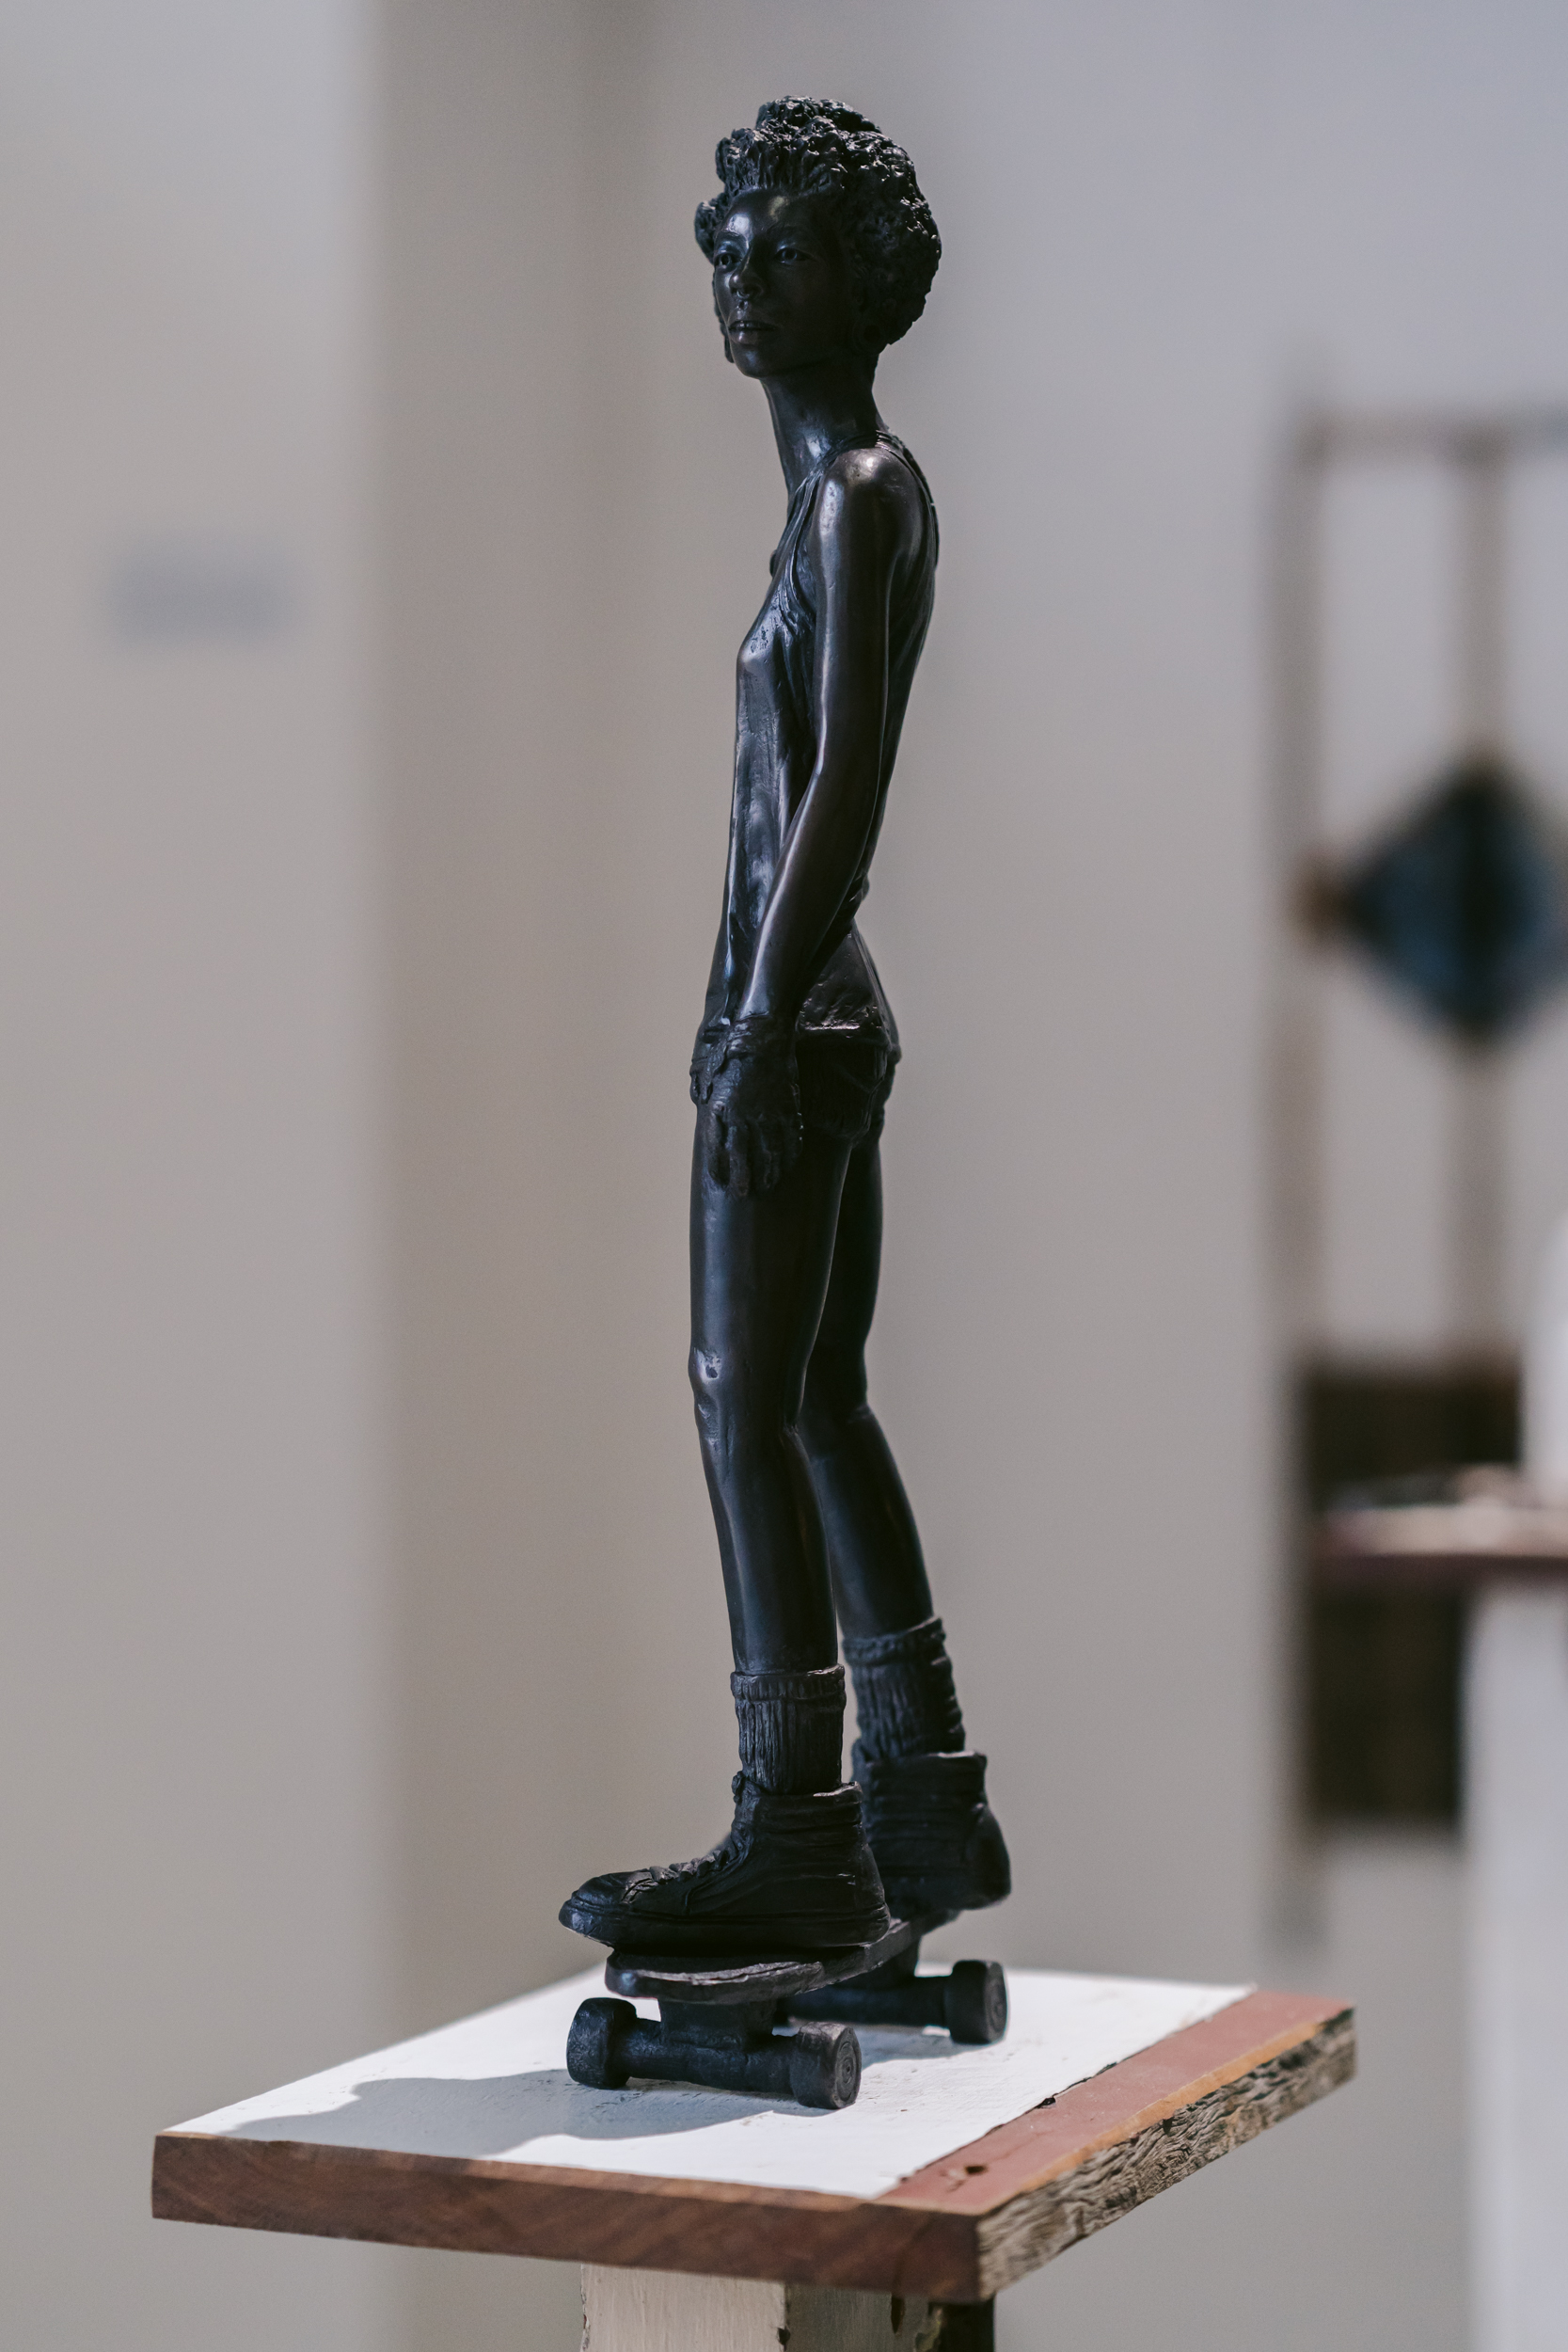 Triple Axis Intersectional Skater (60cm) Bronze (black patina) 1 of 3 only  by Leonie Rhodes | Lethbridge 20000 2022 Finalists | Lethbridge Gallery